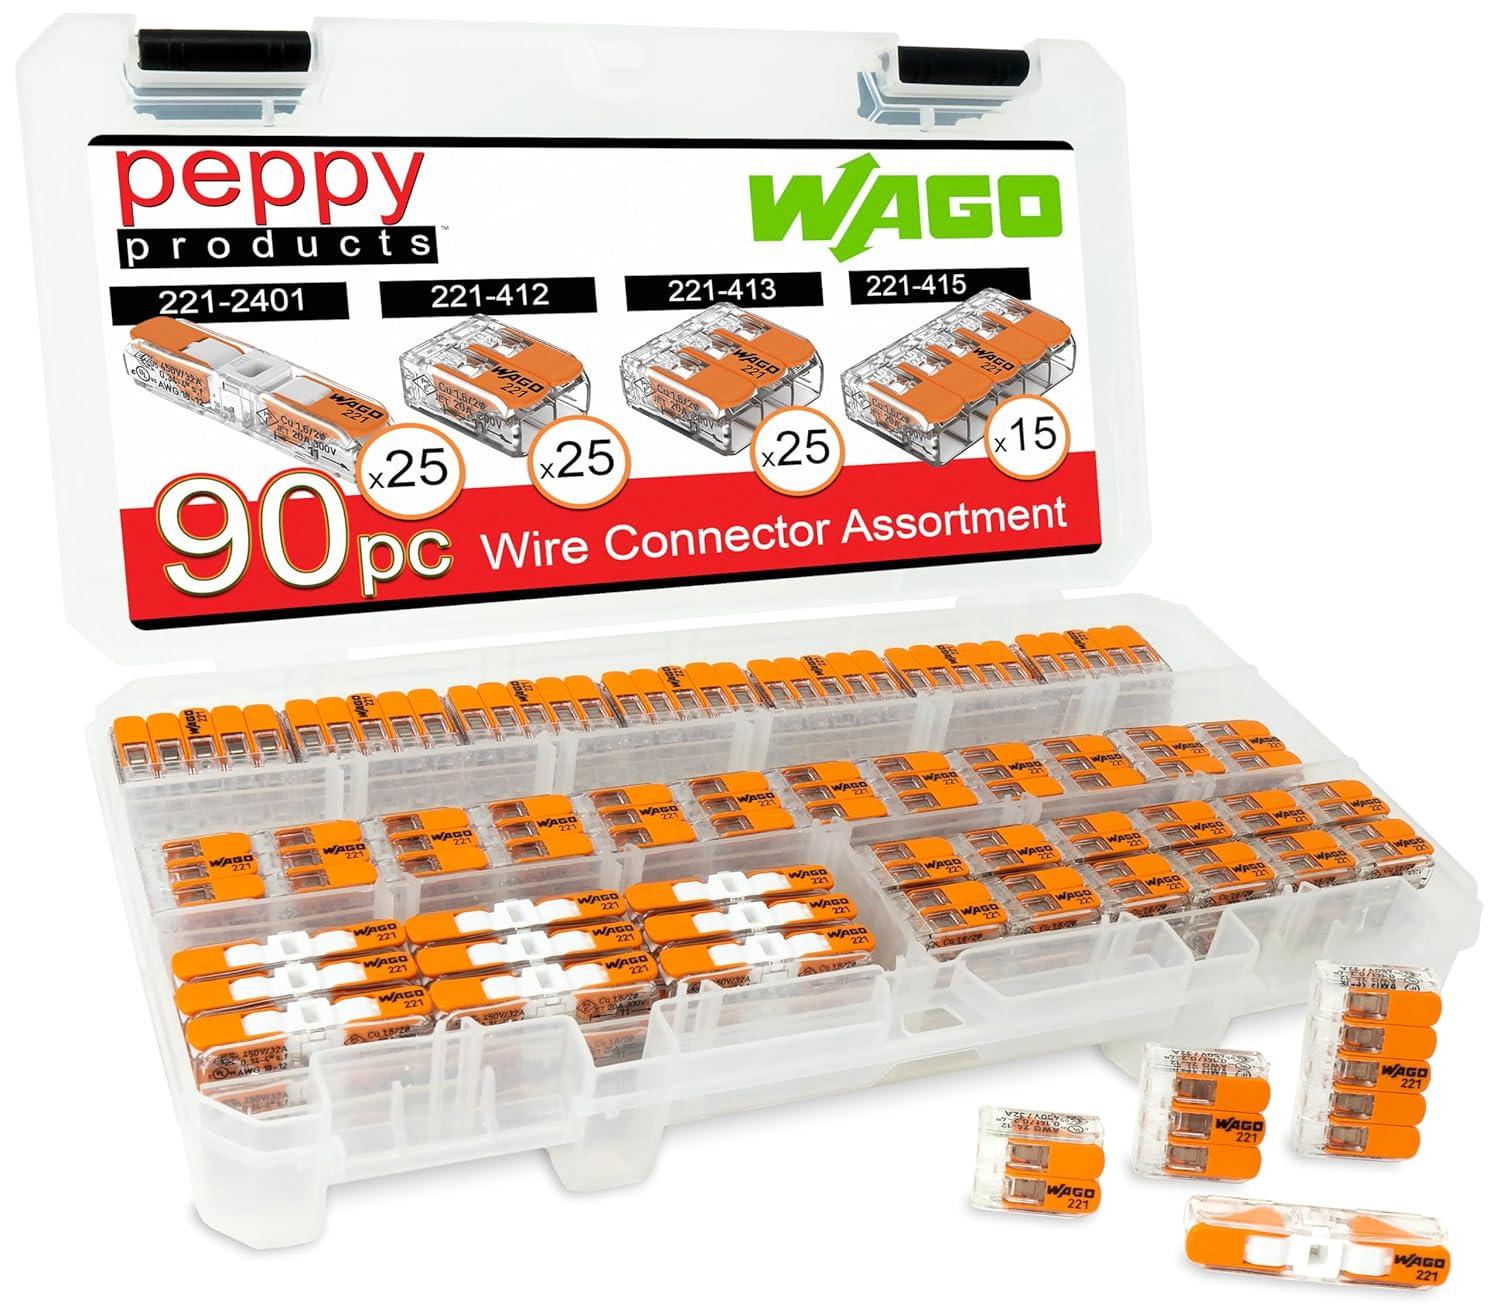 WAGO 221 Lever-Nuts Compact Splicing Wire Connector Assortment for $37.75 Shipped